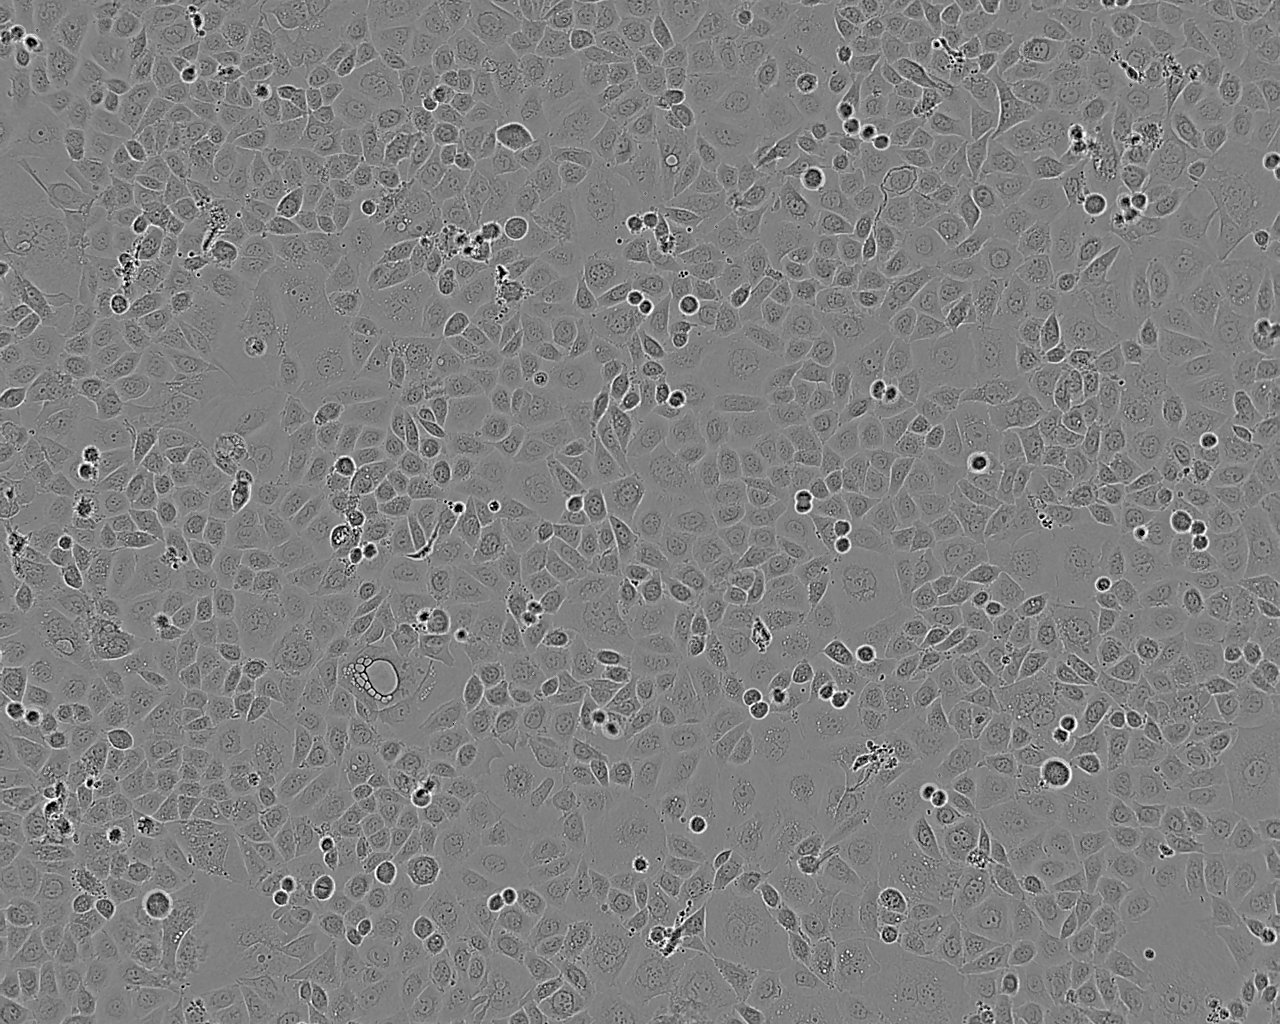 NCI-H125 Epithelial Cell|人非小细胞肺癌传代细胞(有STR鉴定),NCI-H125 Epithelial Cell